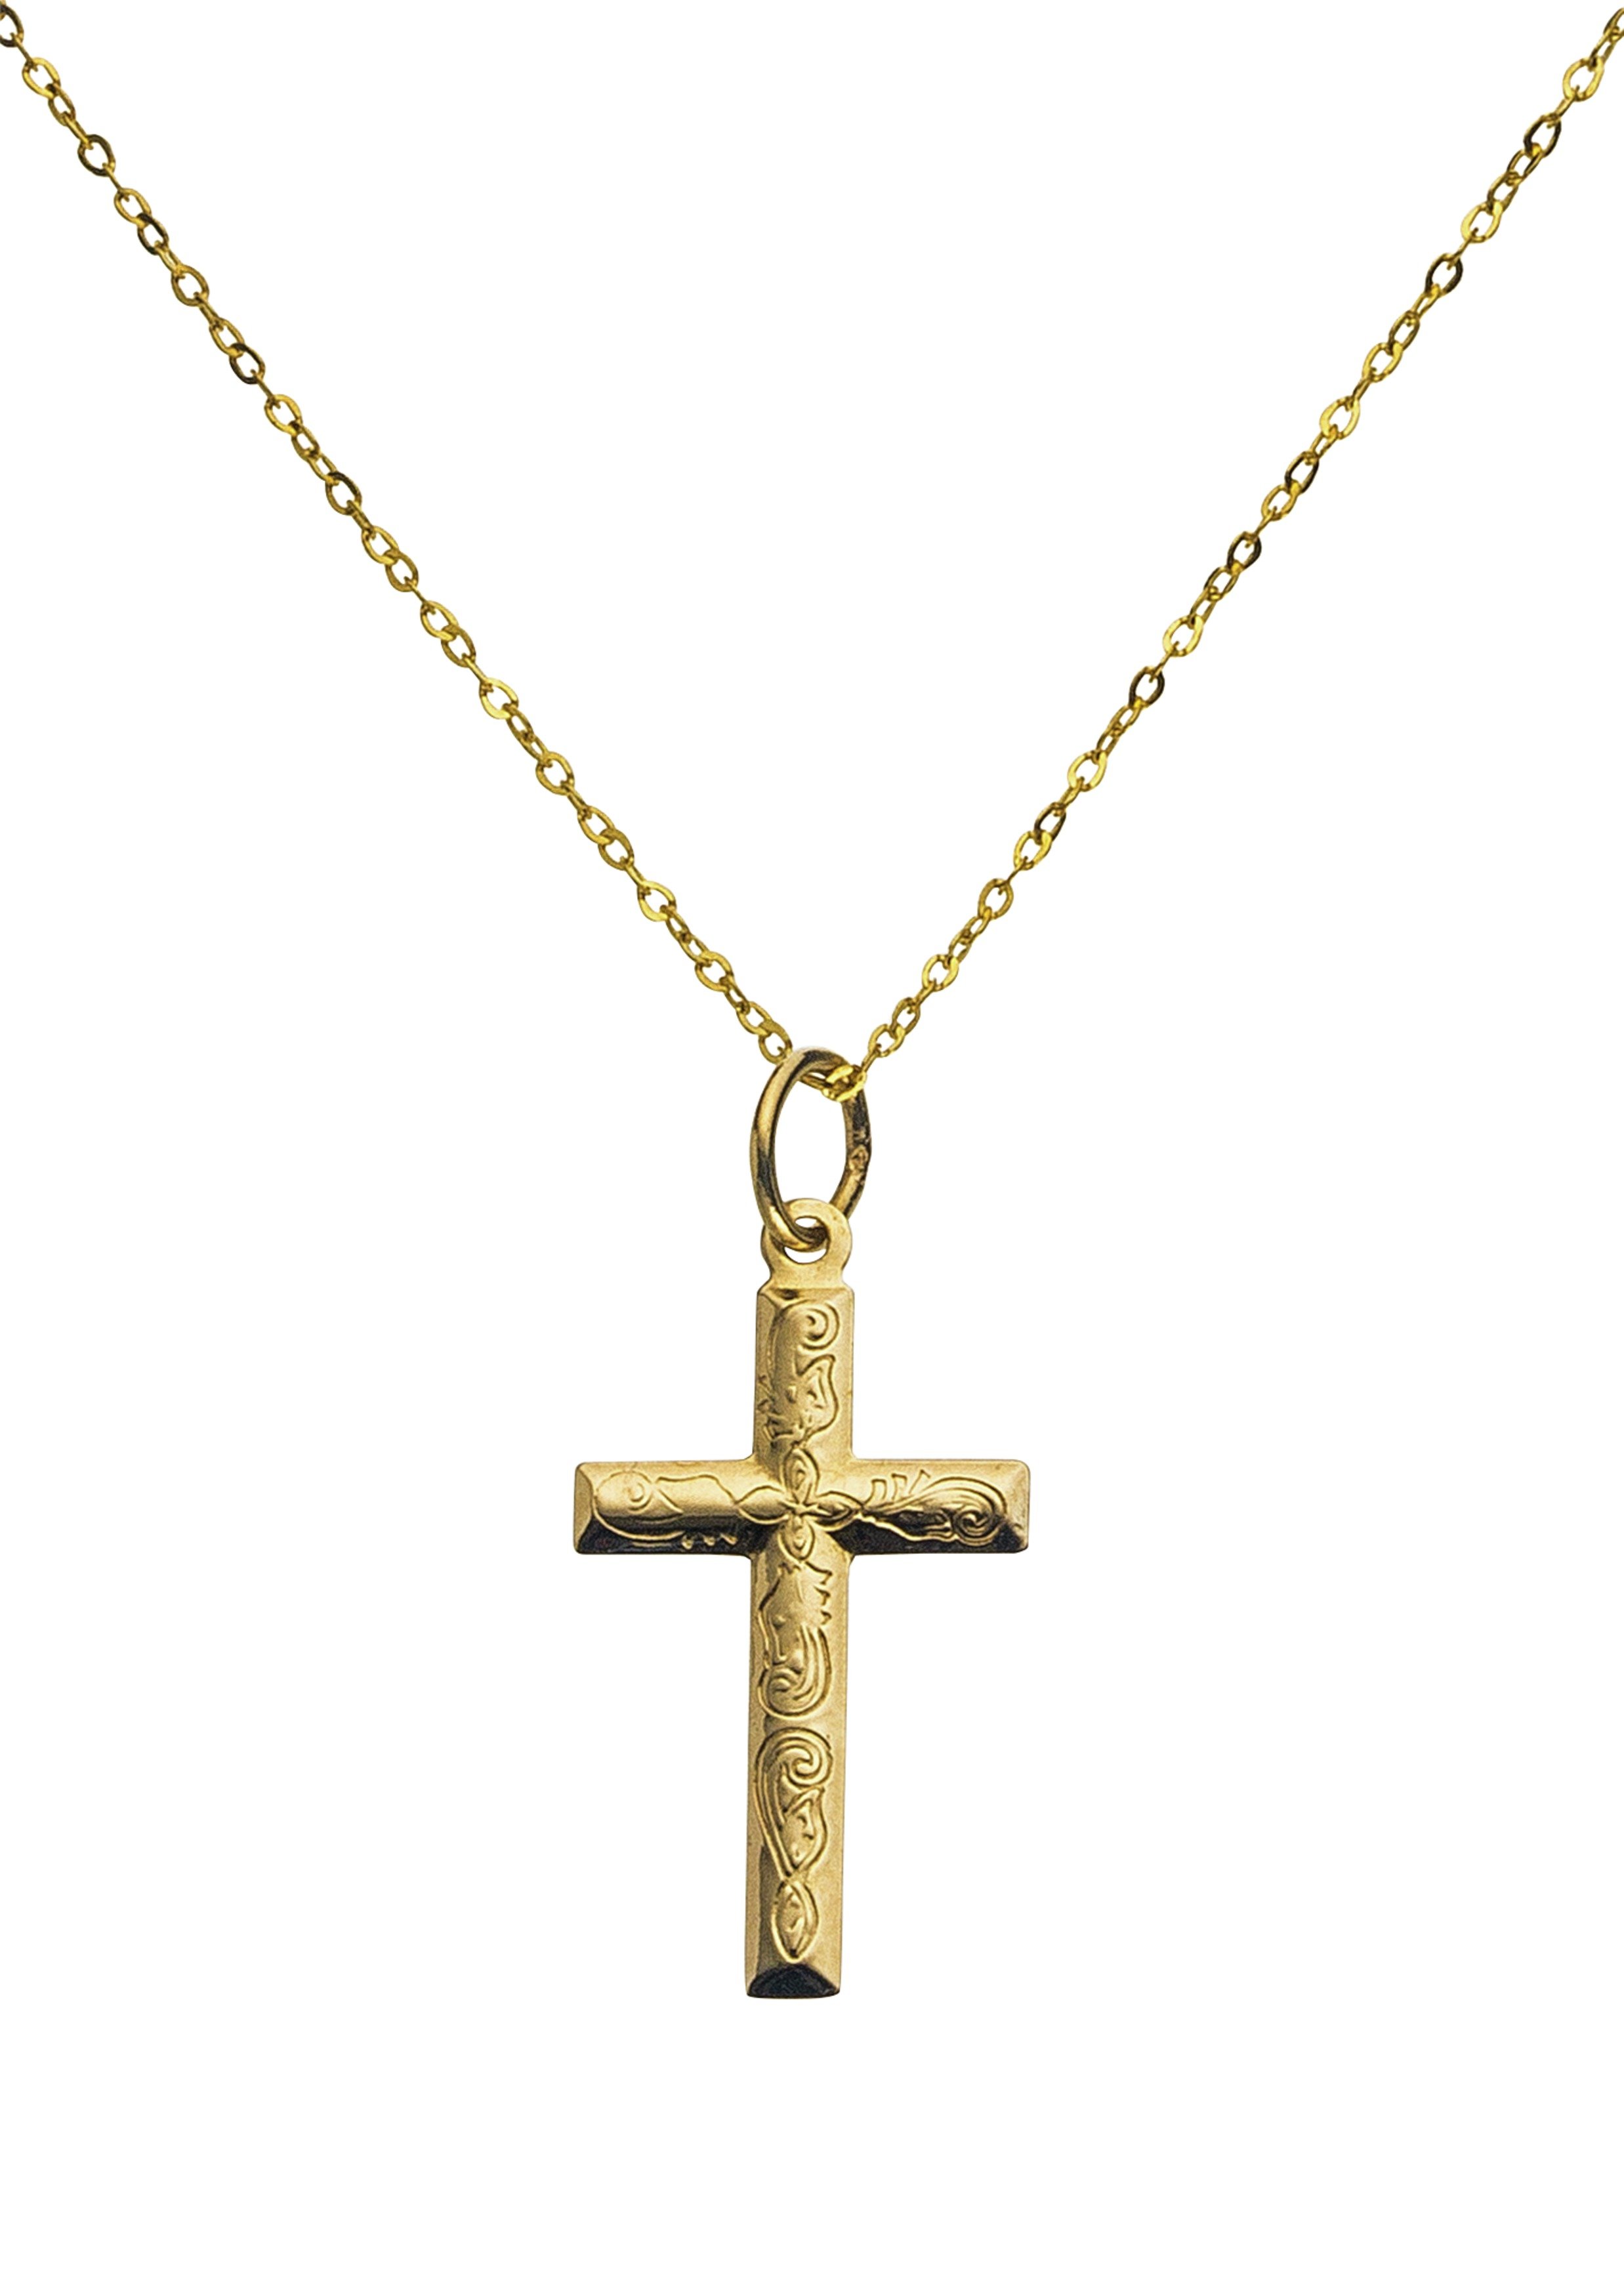 Review of 9 Carat Gold - Double Sided Patterned Cross Pendant.